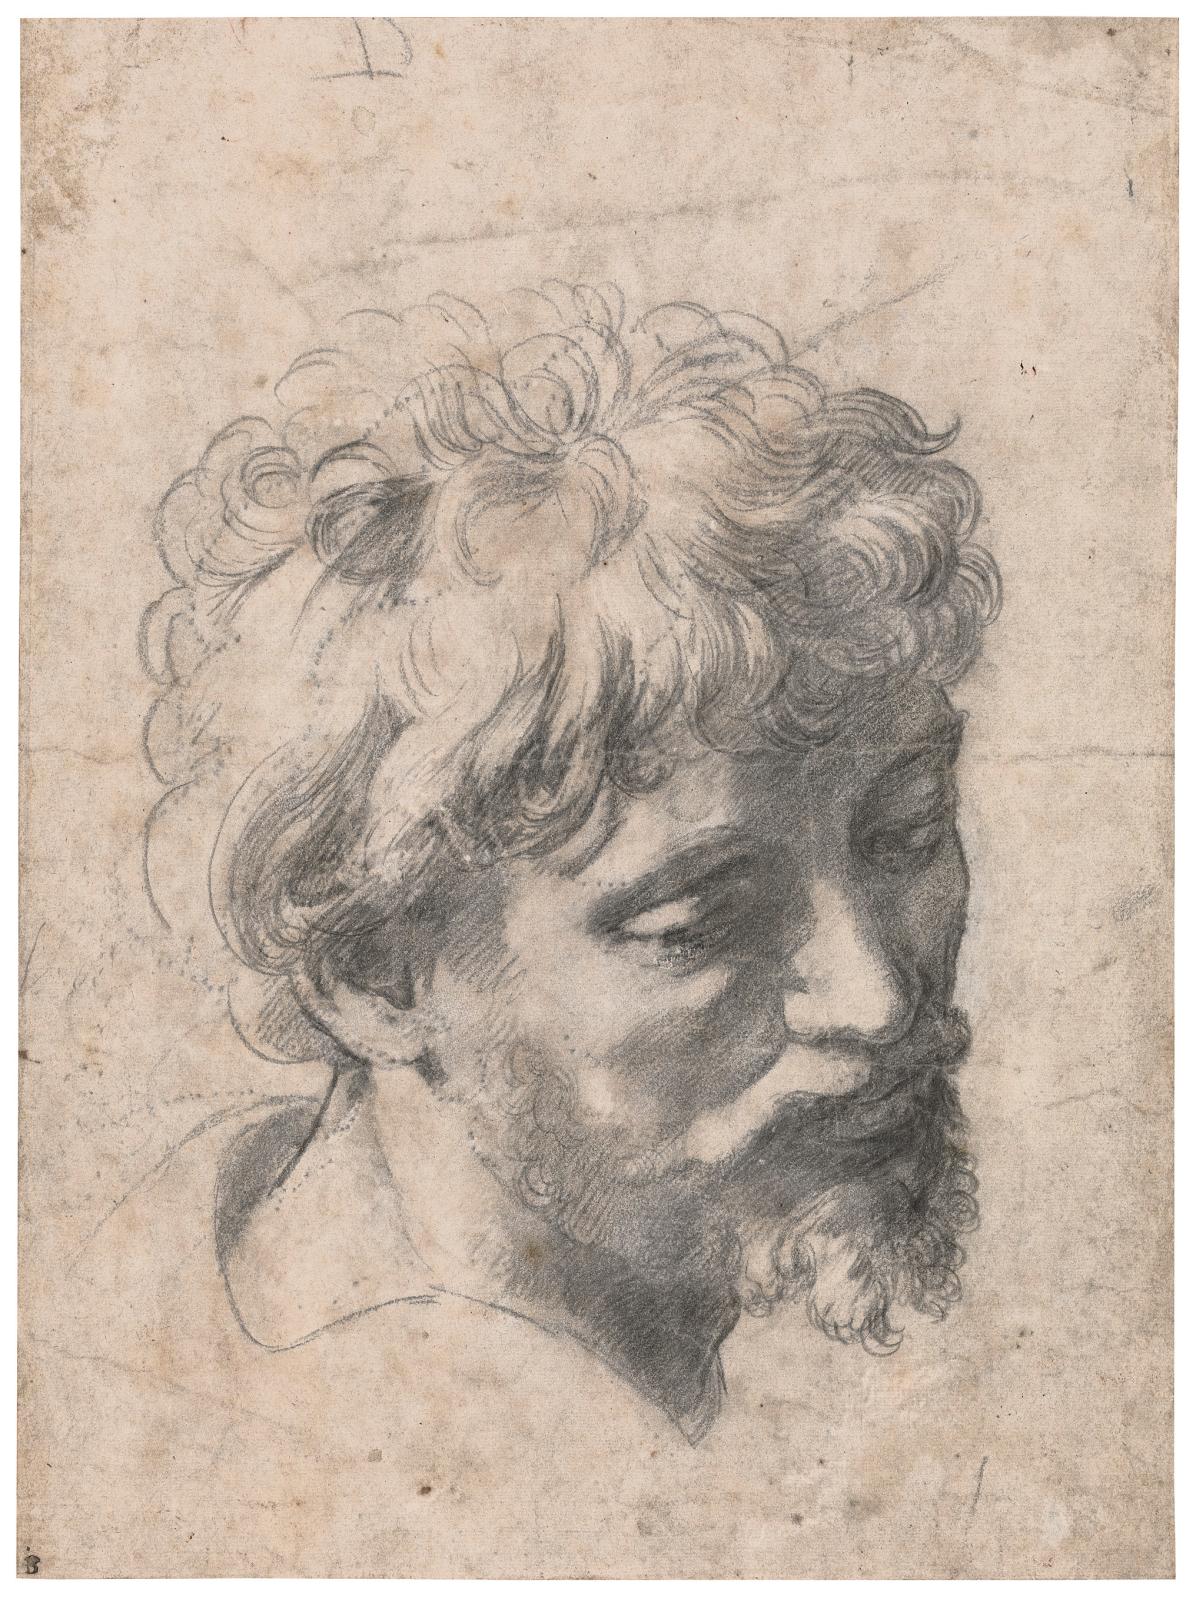 Raphael (1483-1520), Study for the Head of an Apostle in the Transfiguration. Private Collection, New York.© Private Collection